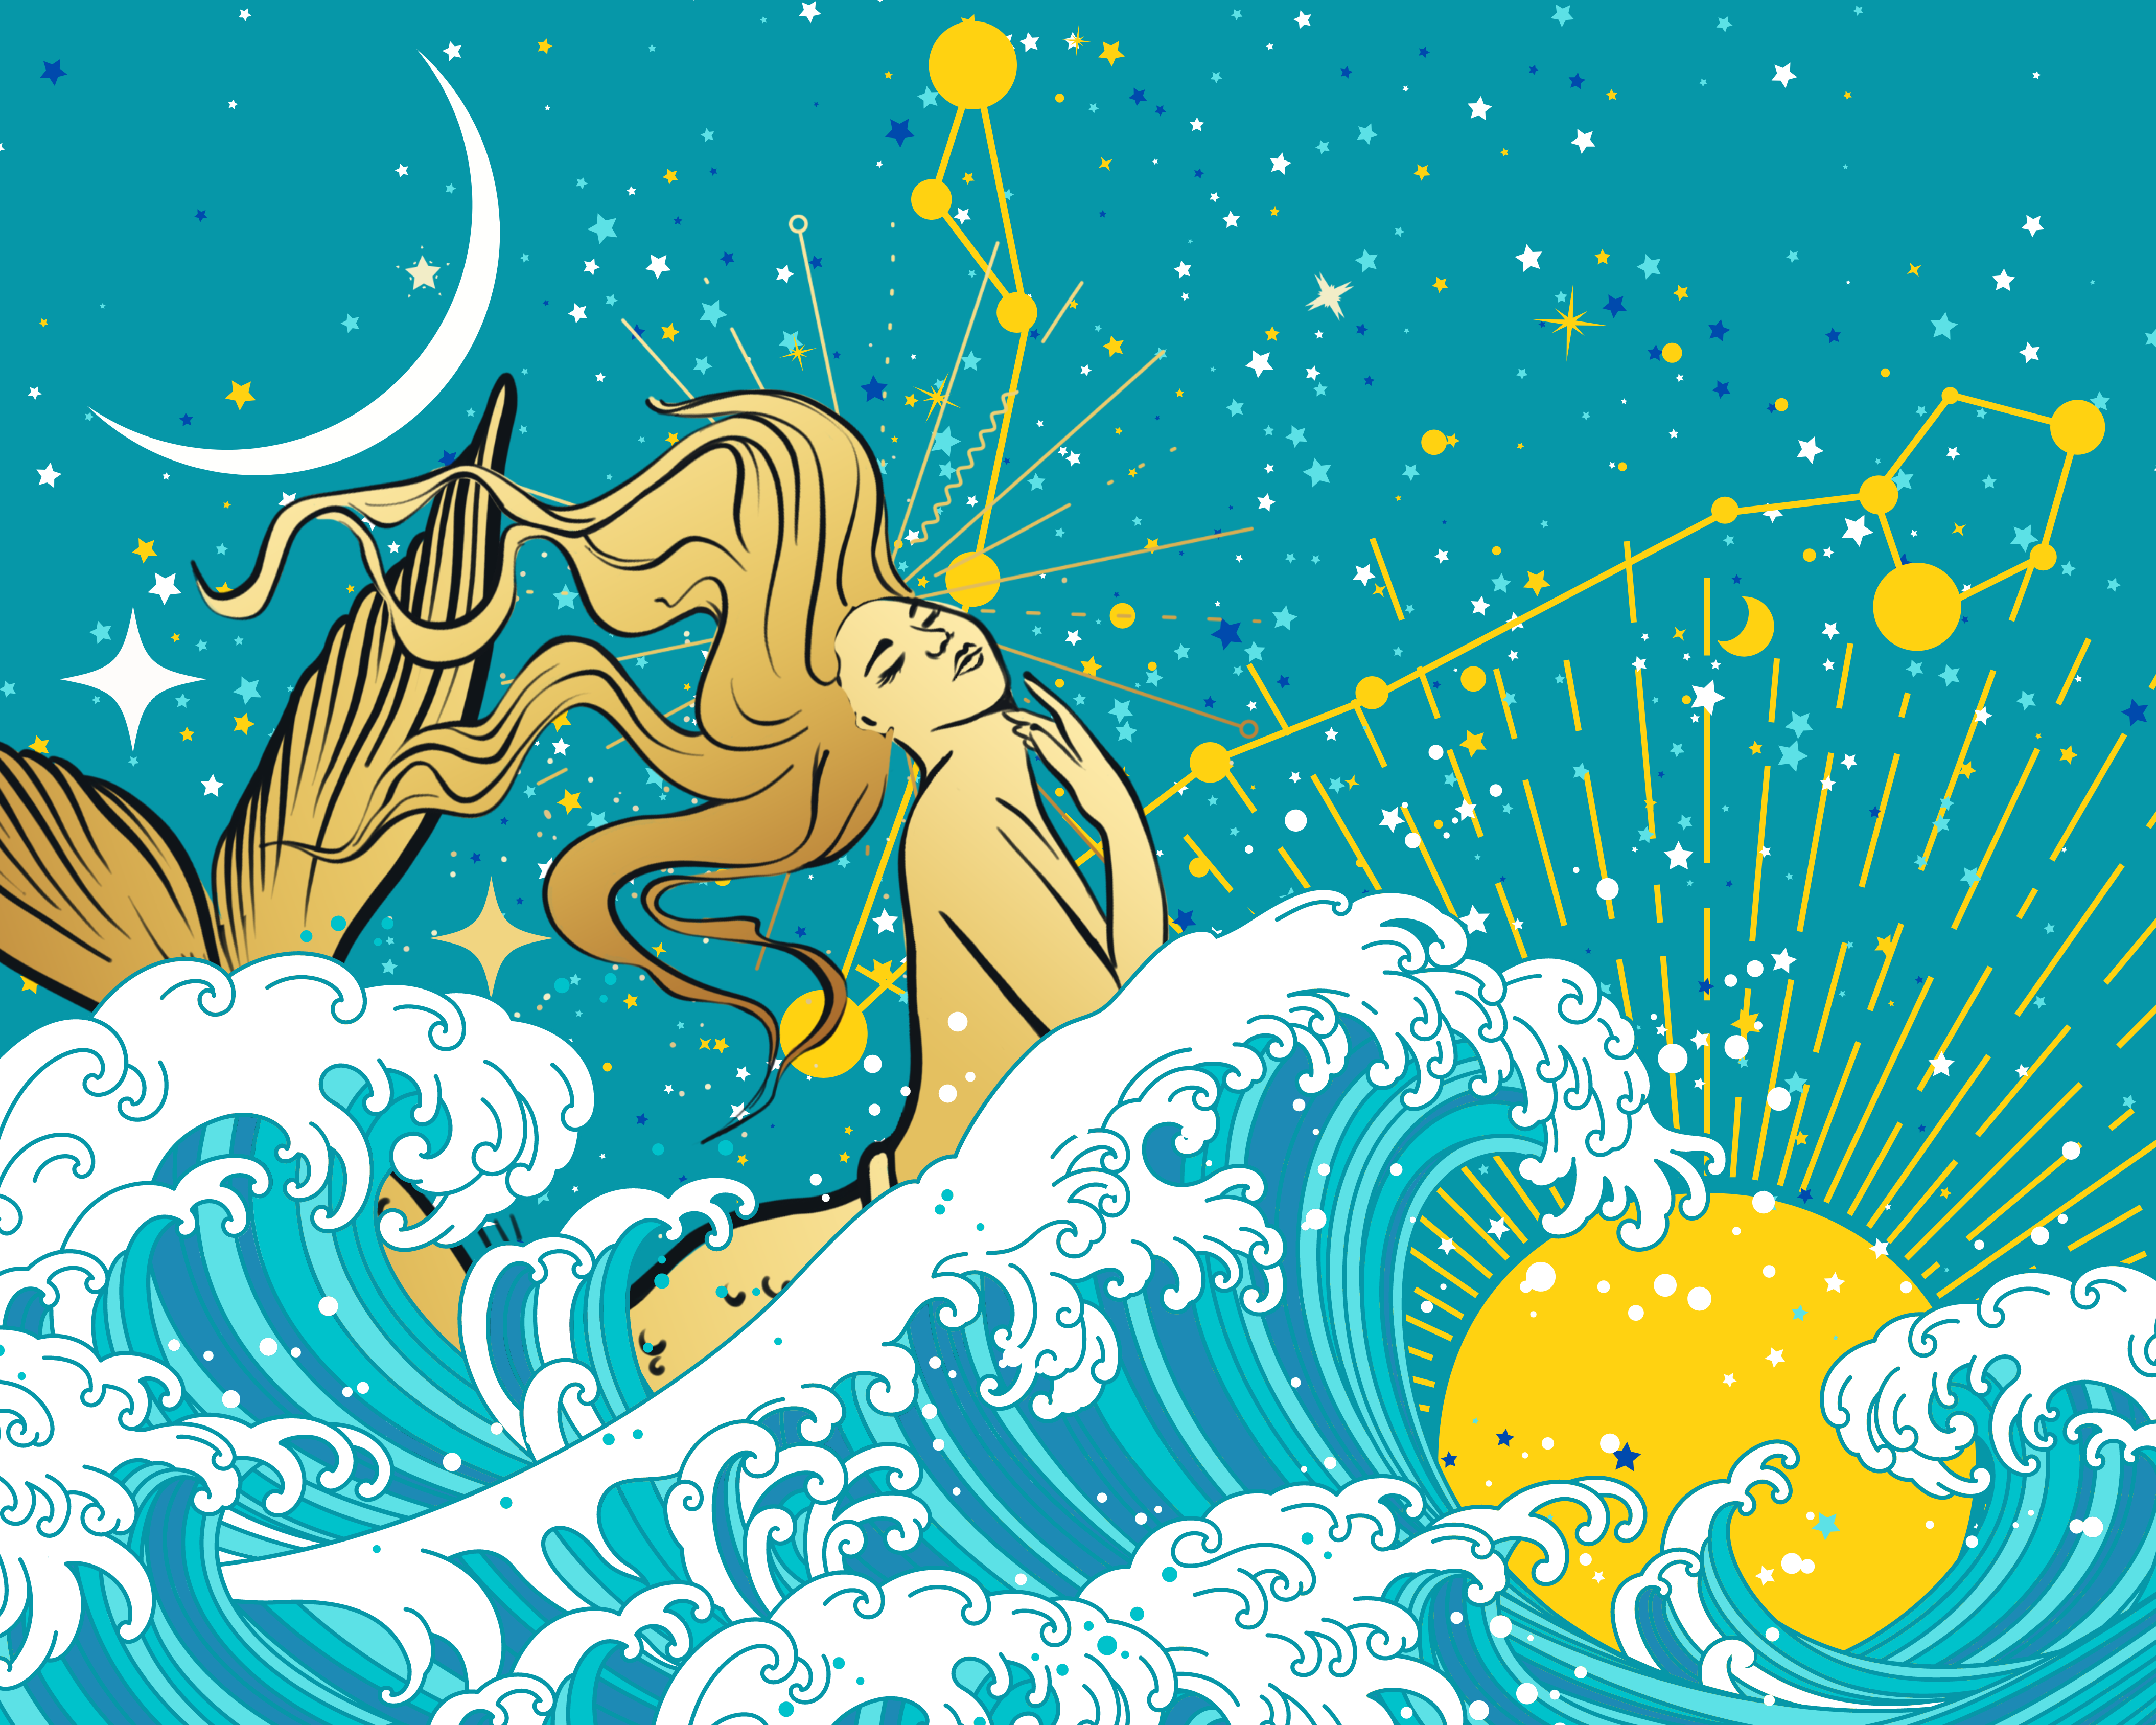 
Out Astrology: What This Week's New Moon in Pisces Has in Store For You
